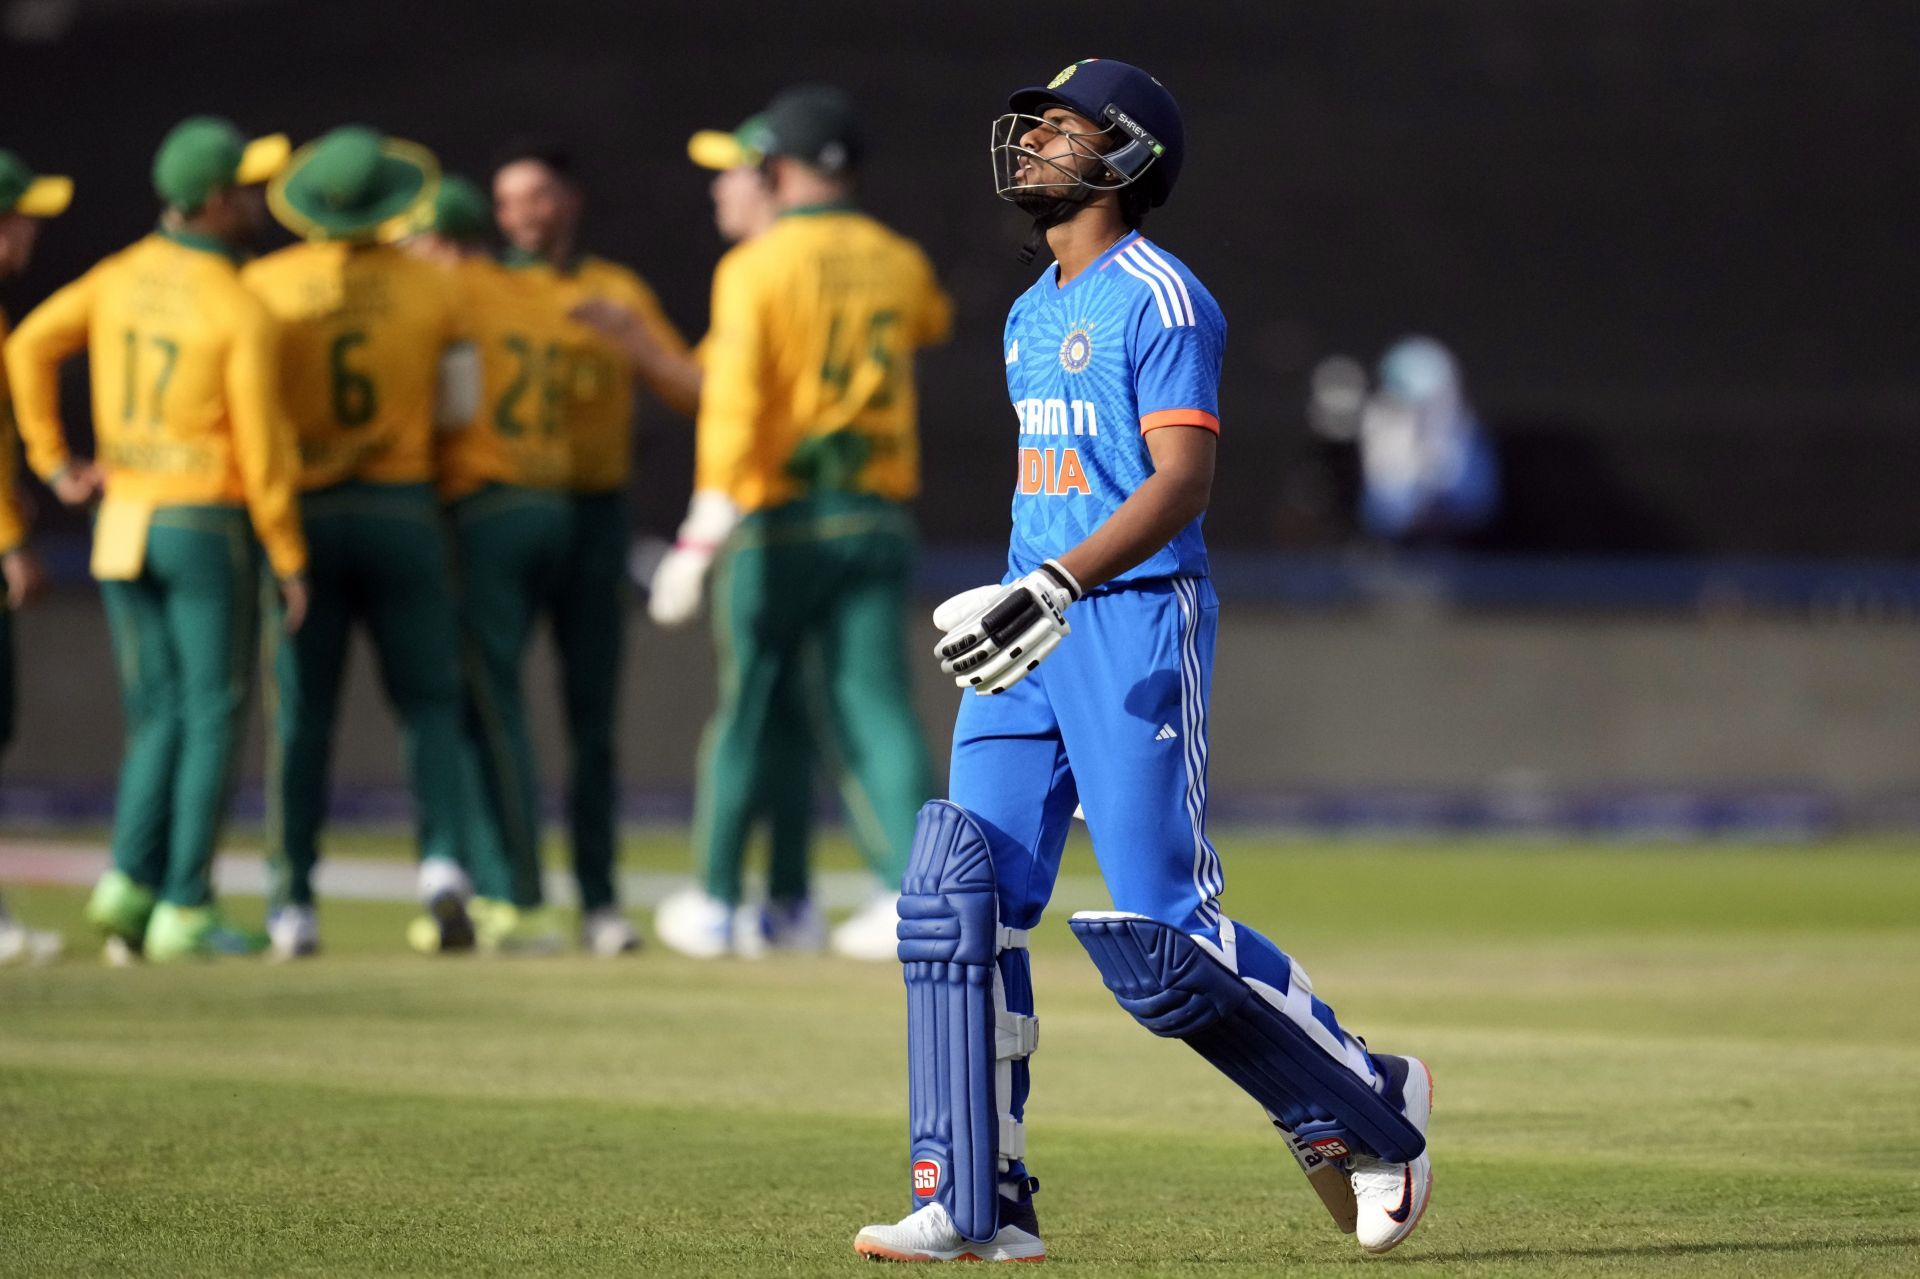 Tilak Varma bagged a first-ball duck in the final T20I